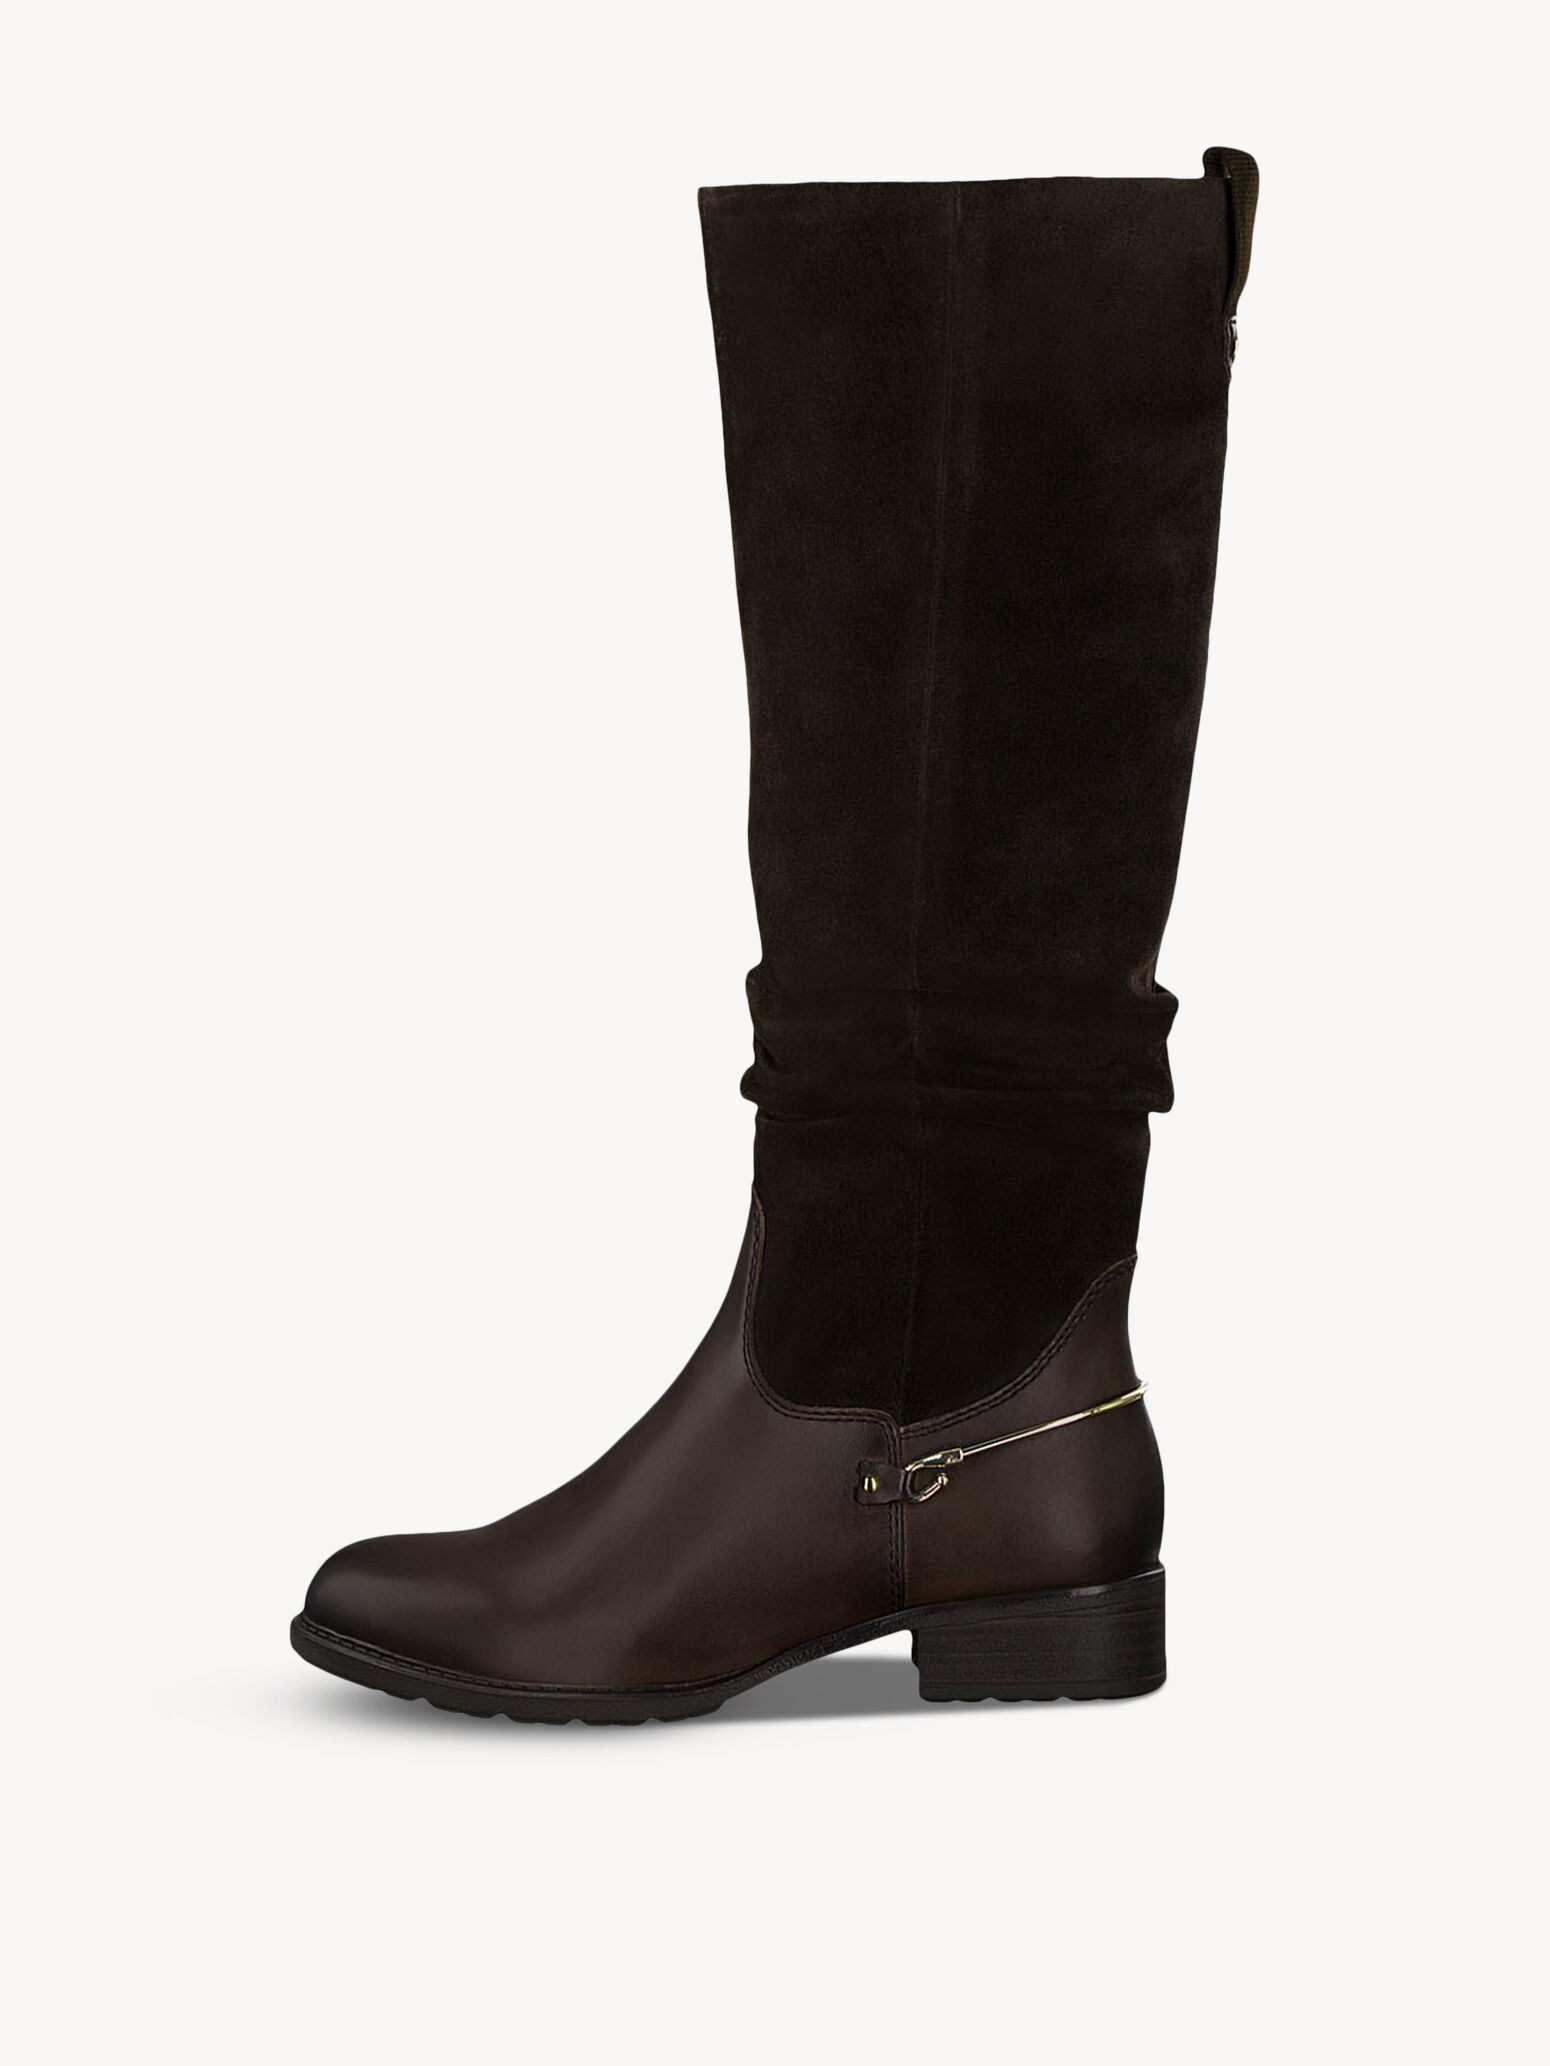 buy leather boots online